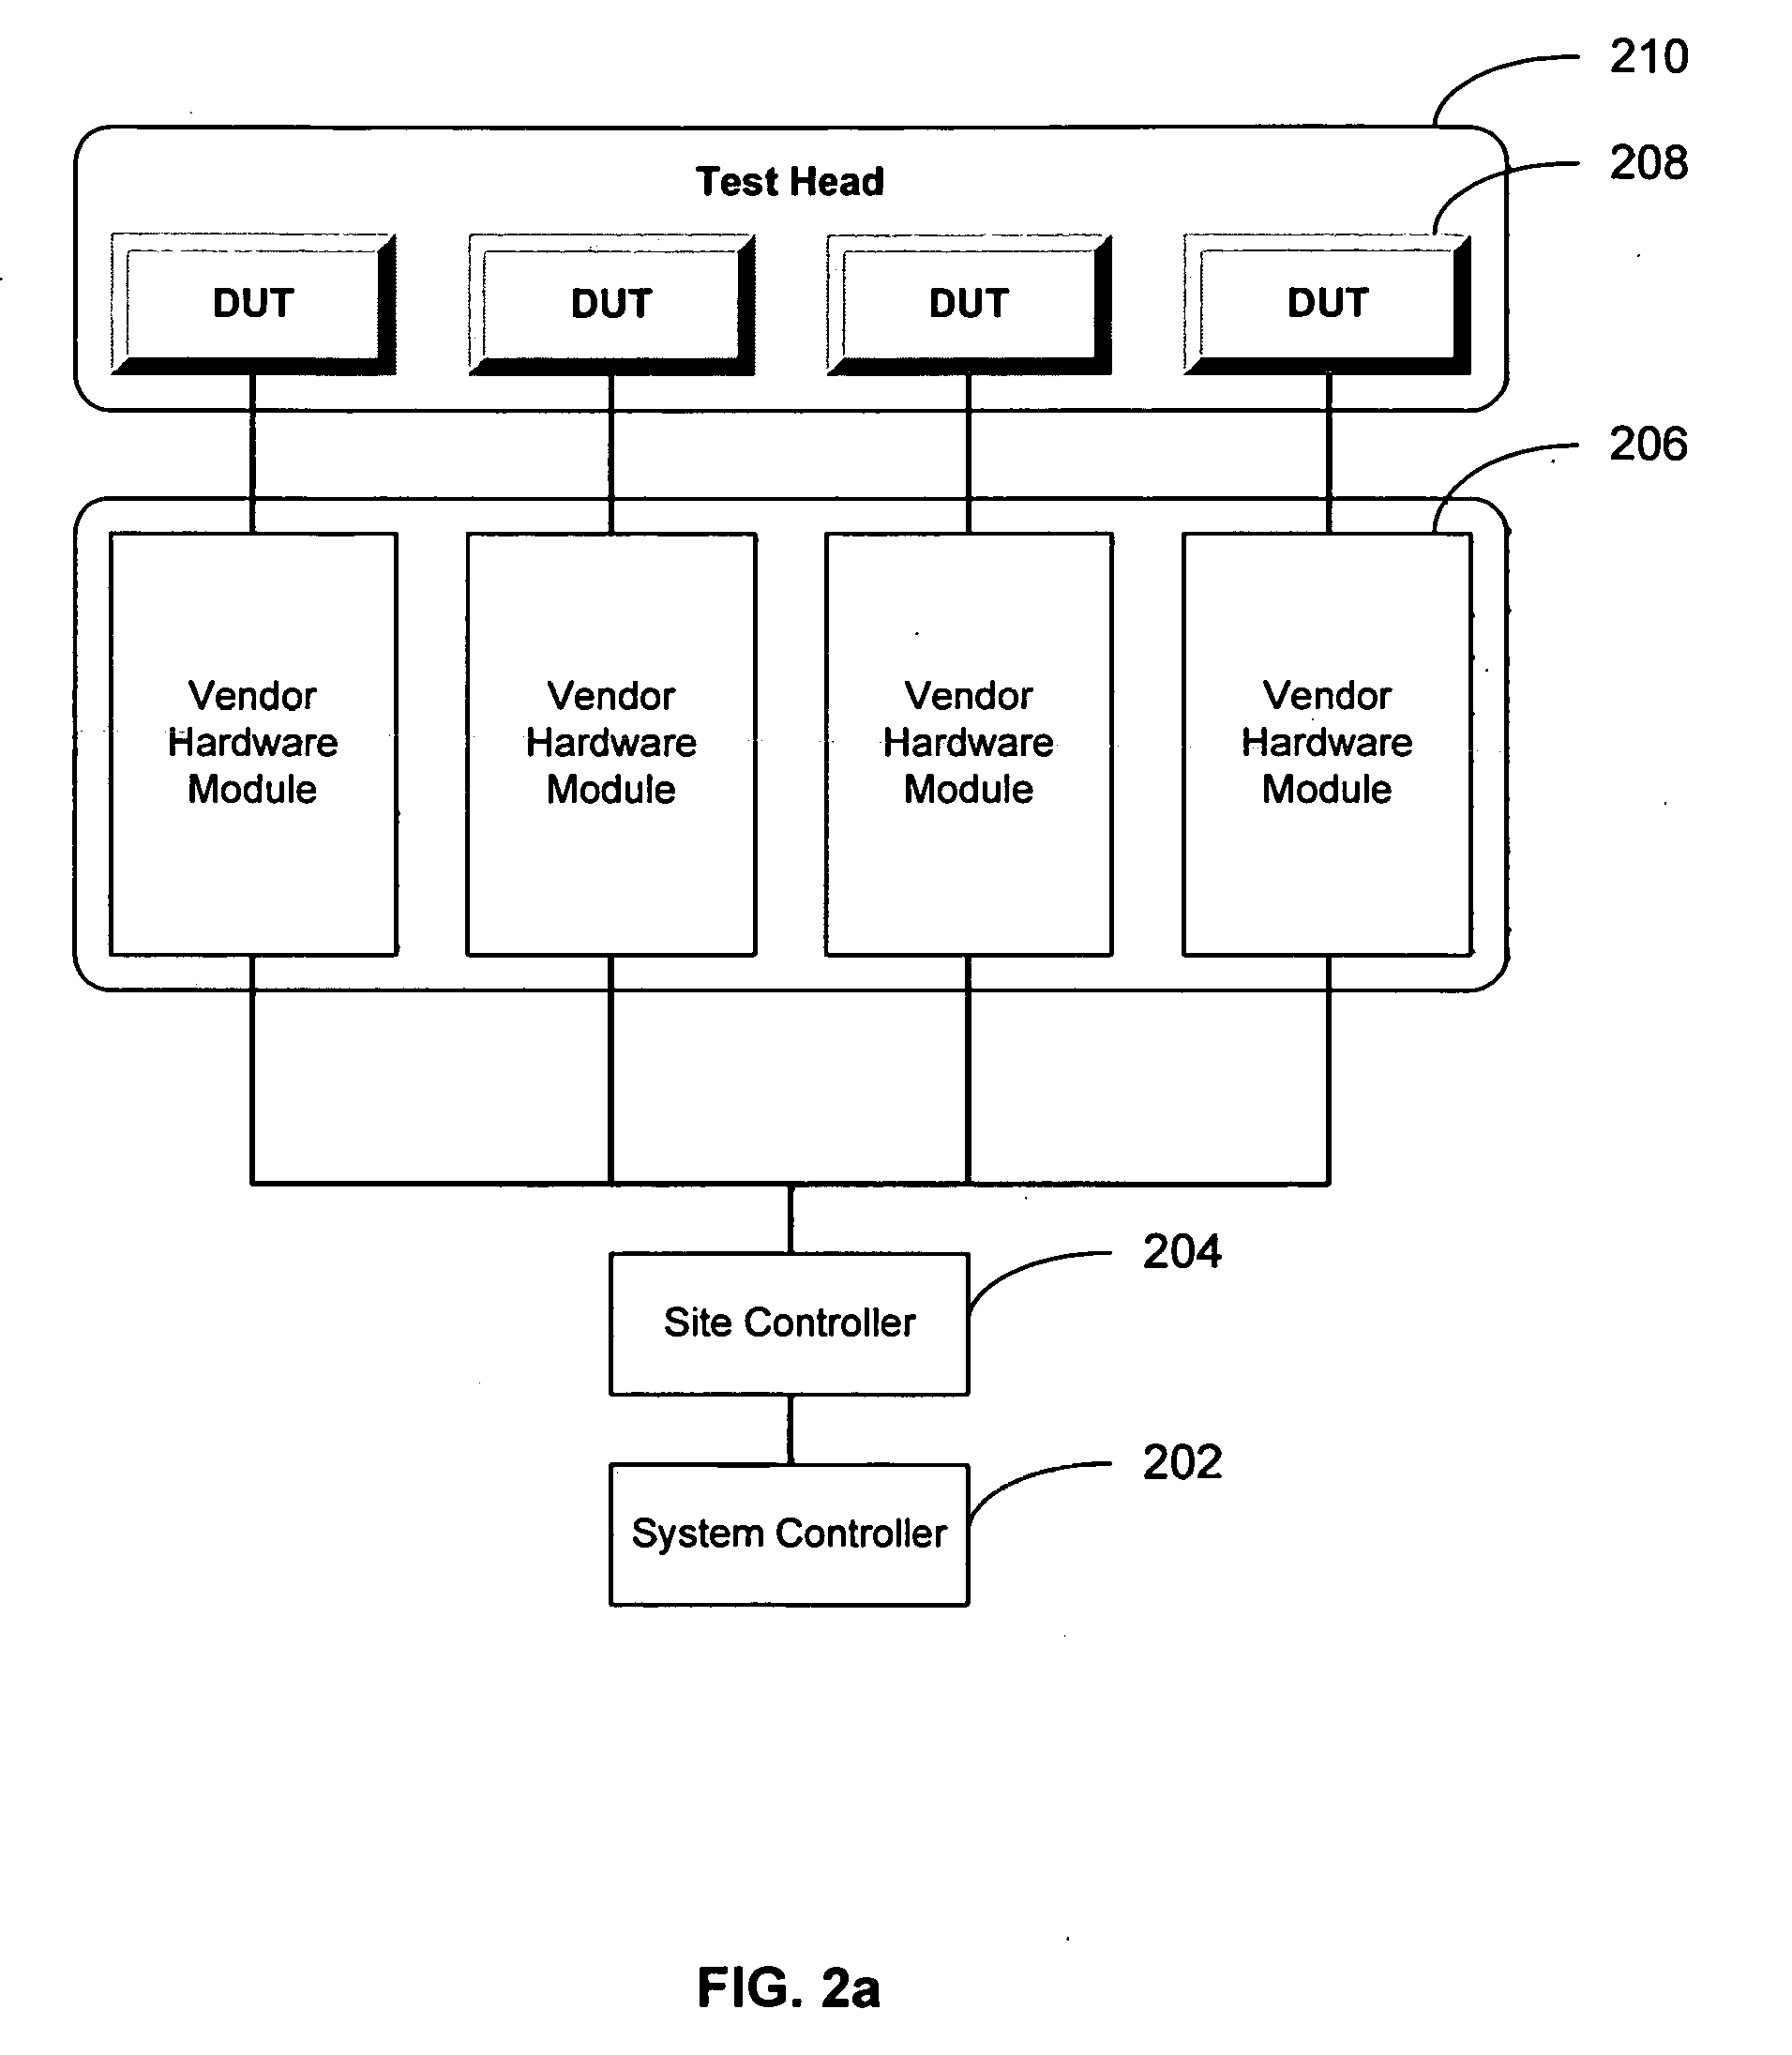 Method and system for scheduling tests in a parallel test system